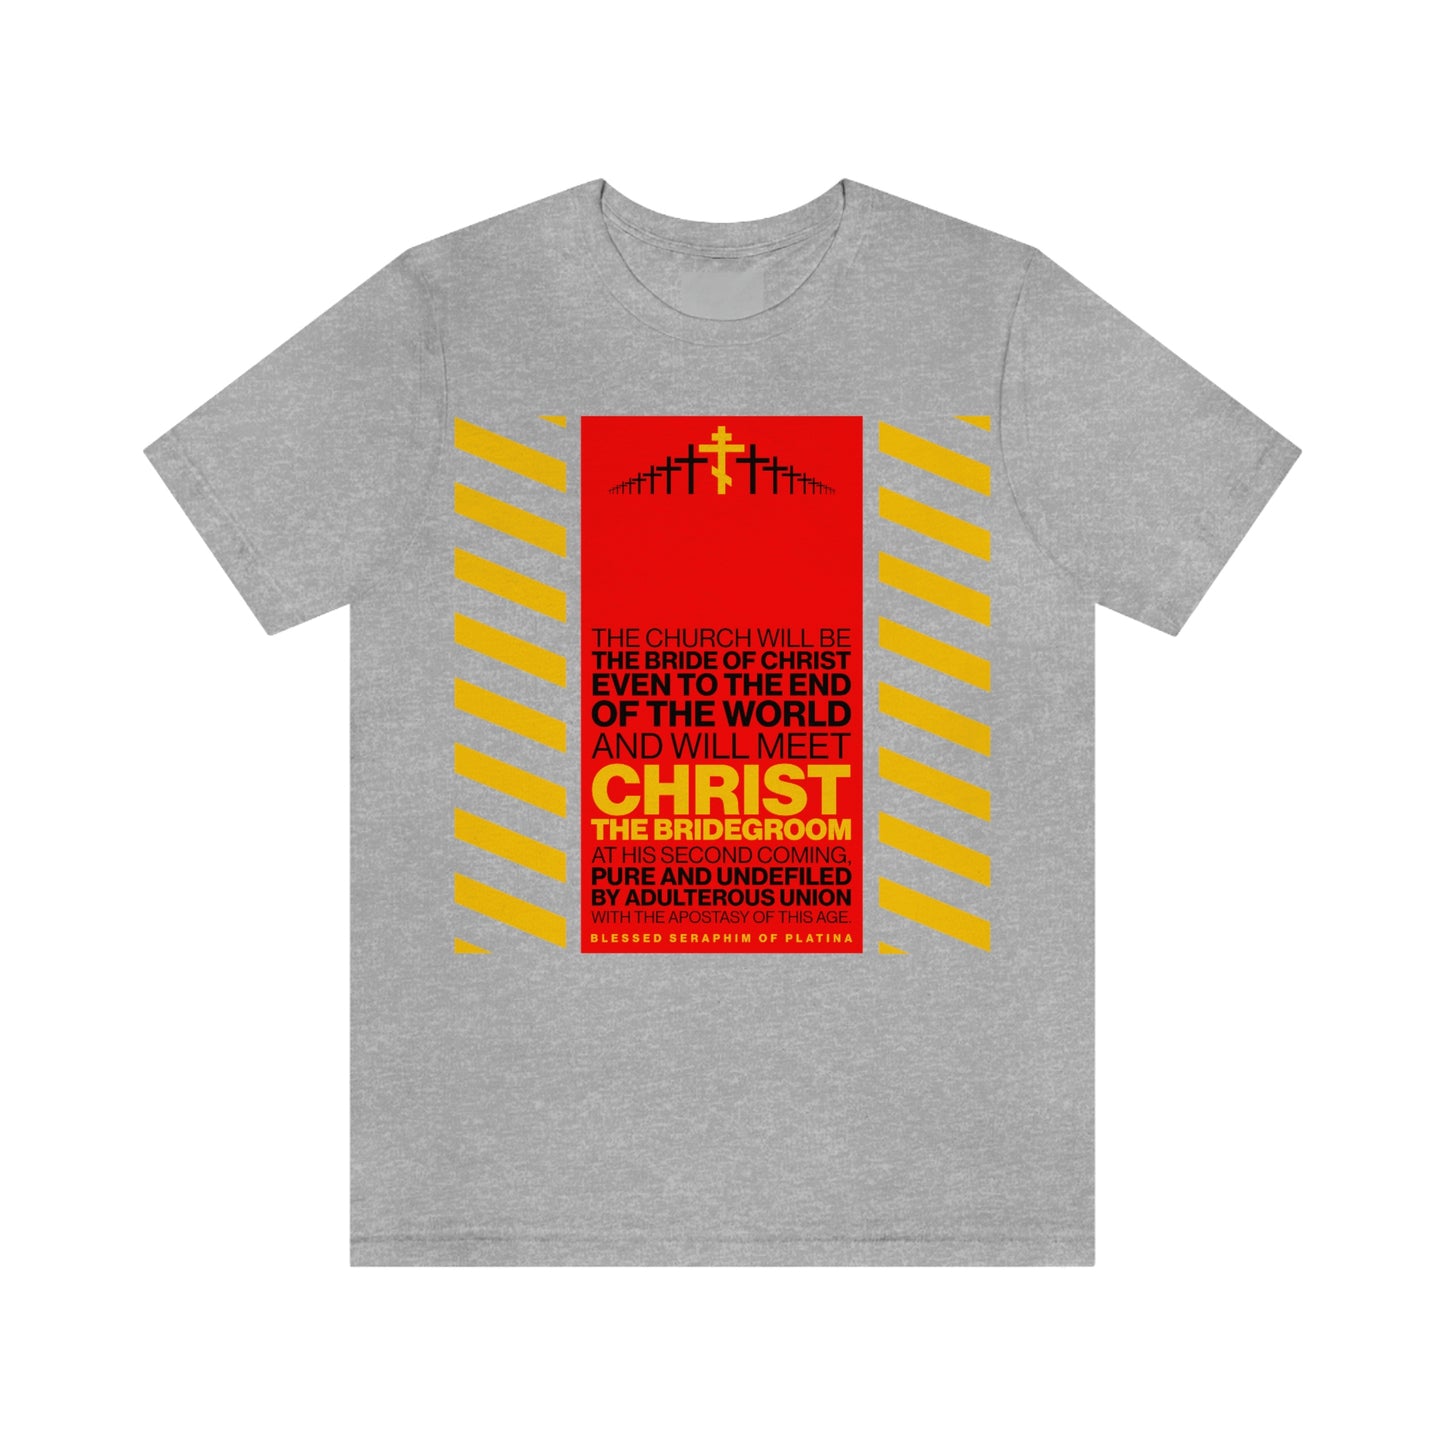 The Church Will Be the Bride of Christ No. 1 | Orthodox Christian T-Shirt